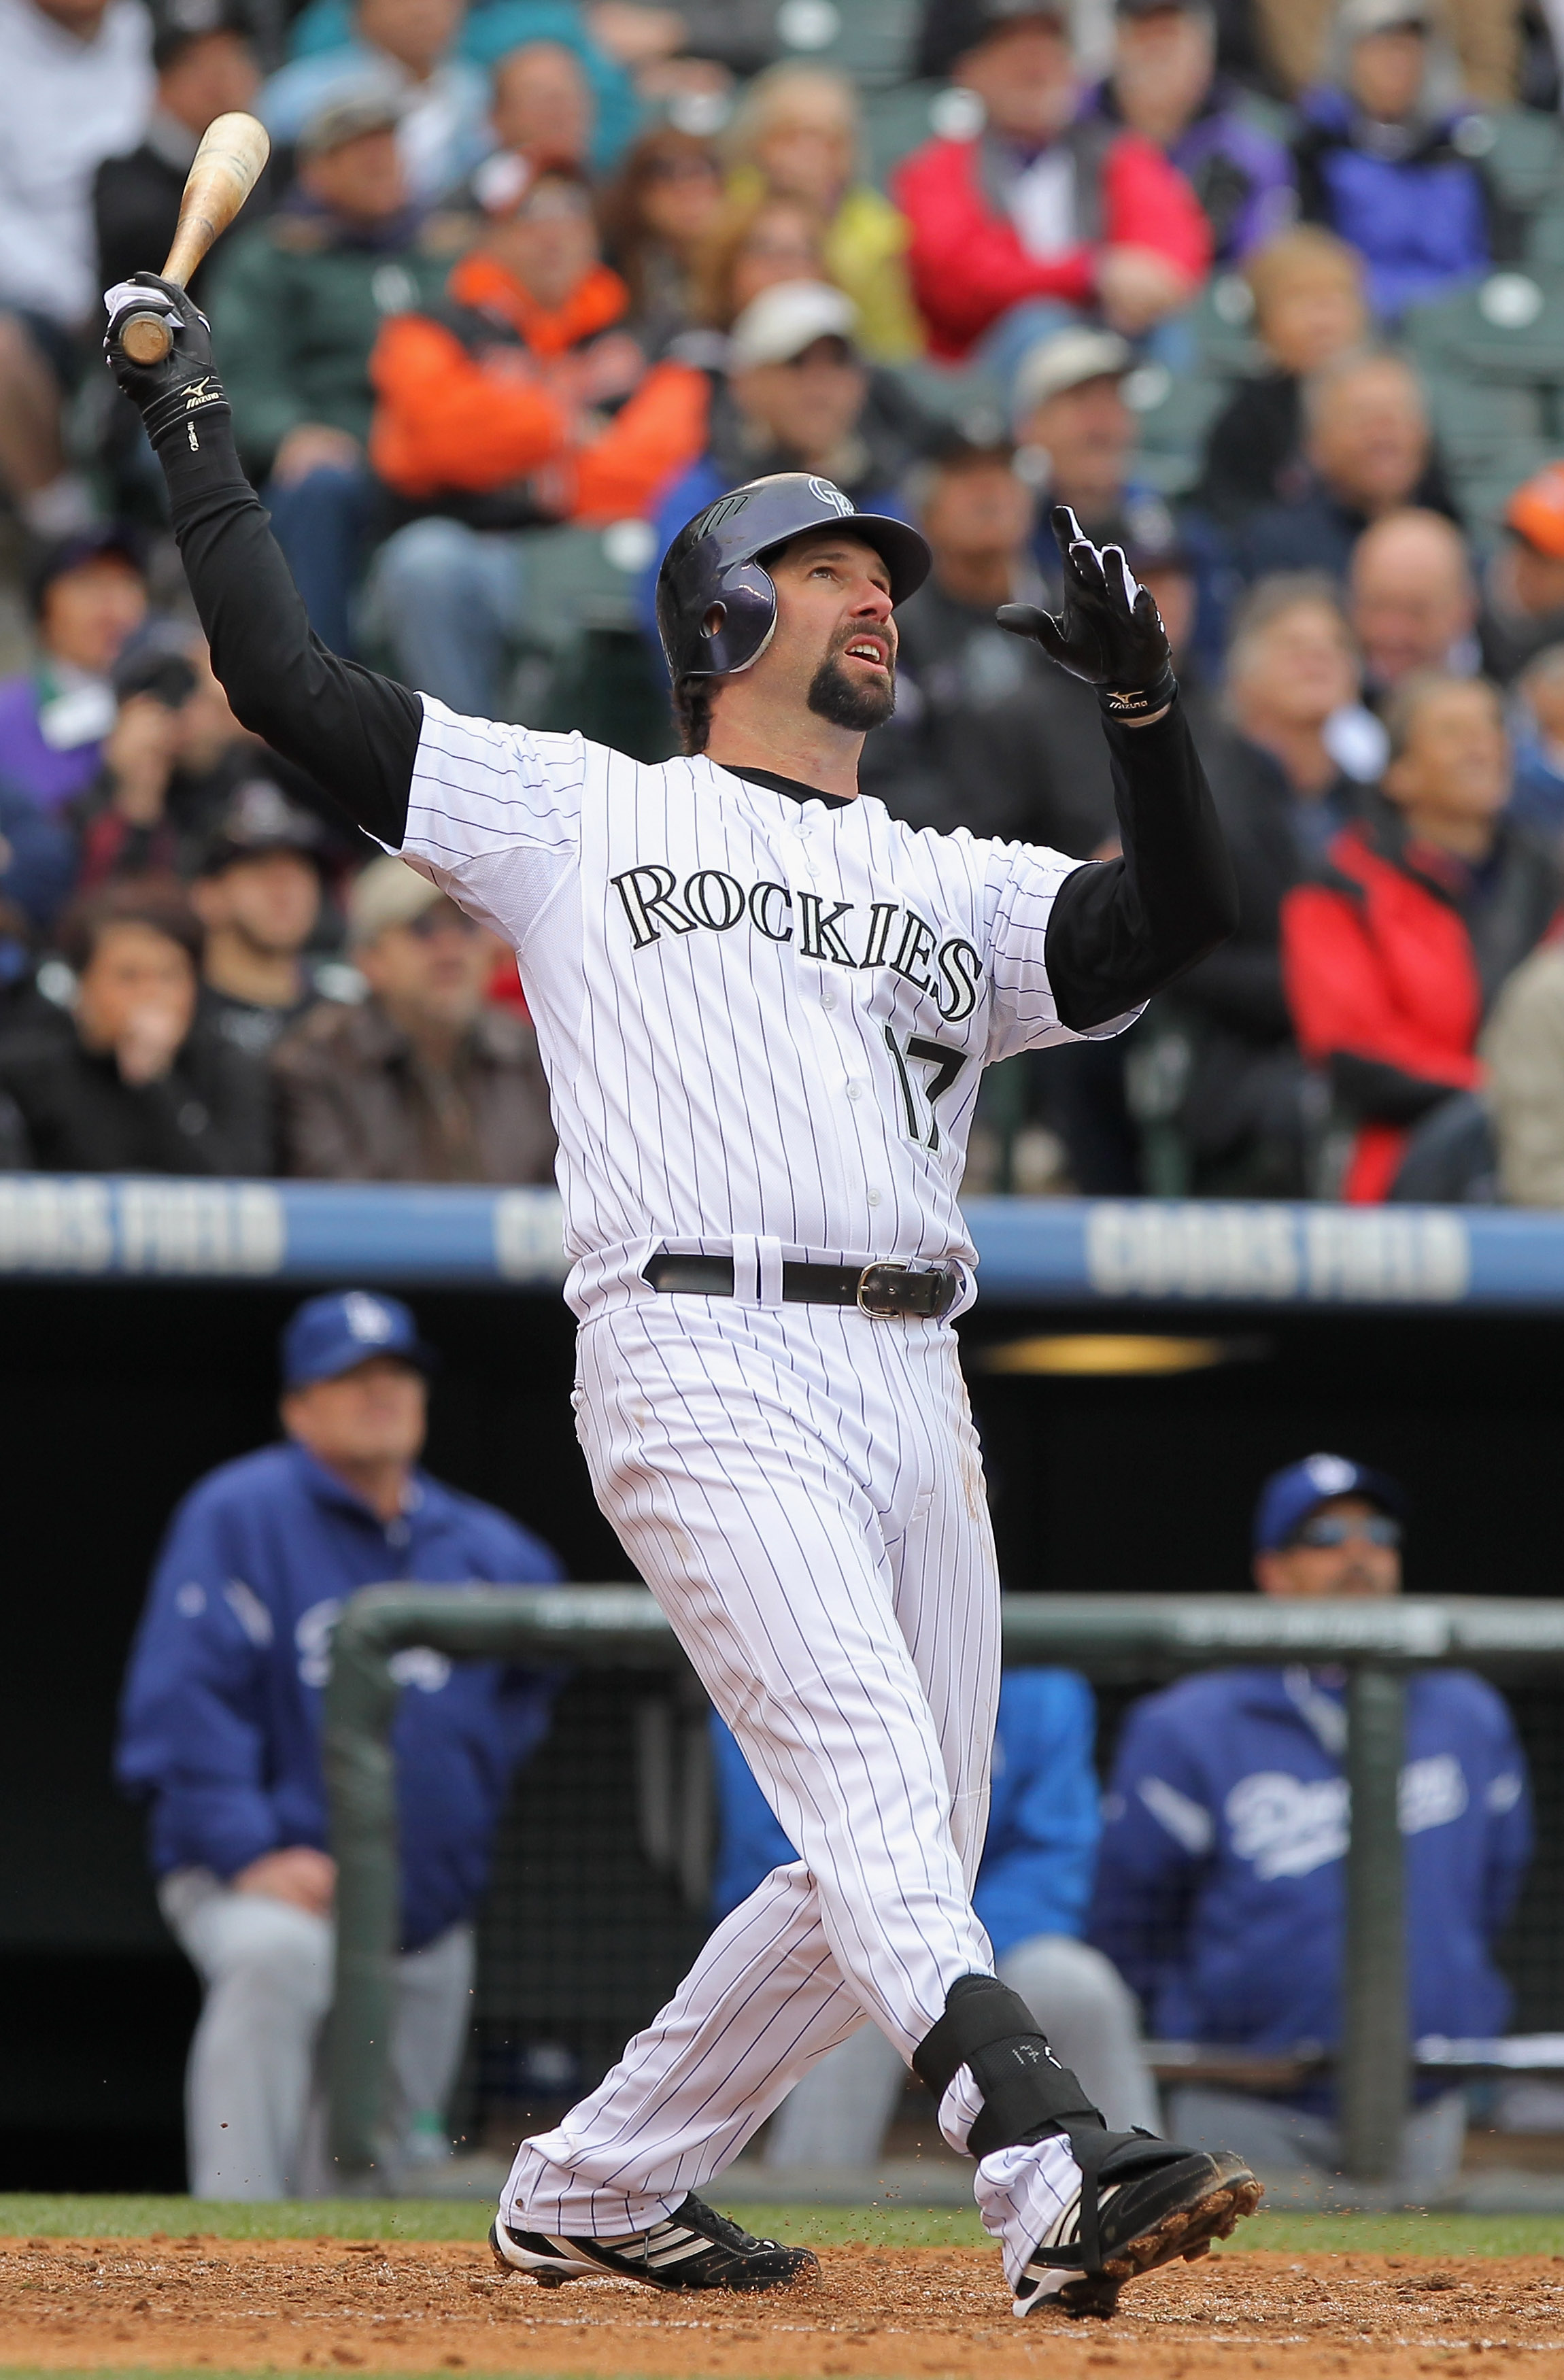 DENVER, CO - APRIL 06:  First baseman Todd Helton #17 of the Colorado Rockies watches his three run homerun off of starting pitcher Chad Billingsley #58 of the Los Angeles Dodgers to give the Rockies a 5-4 lead in the third inning at Coors Field on April